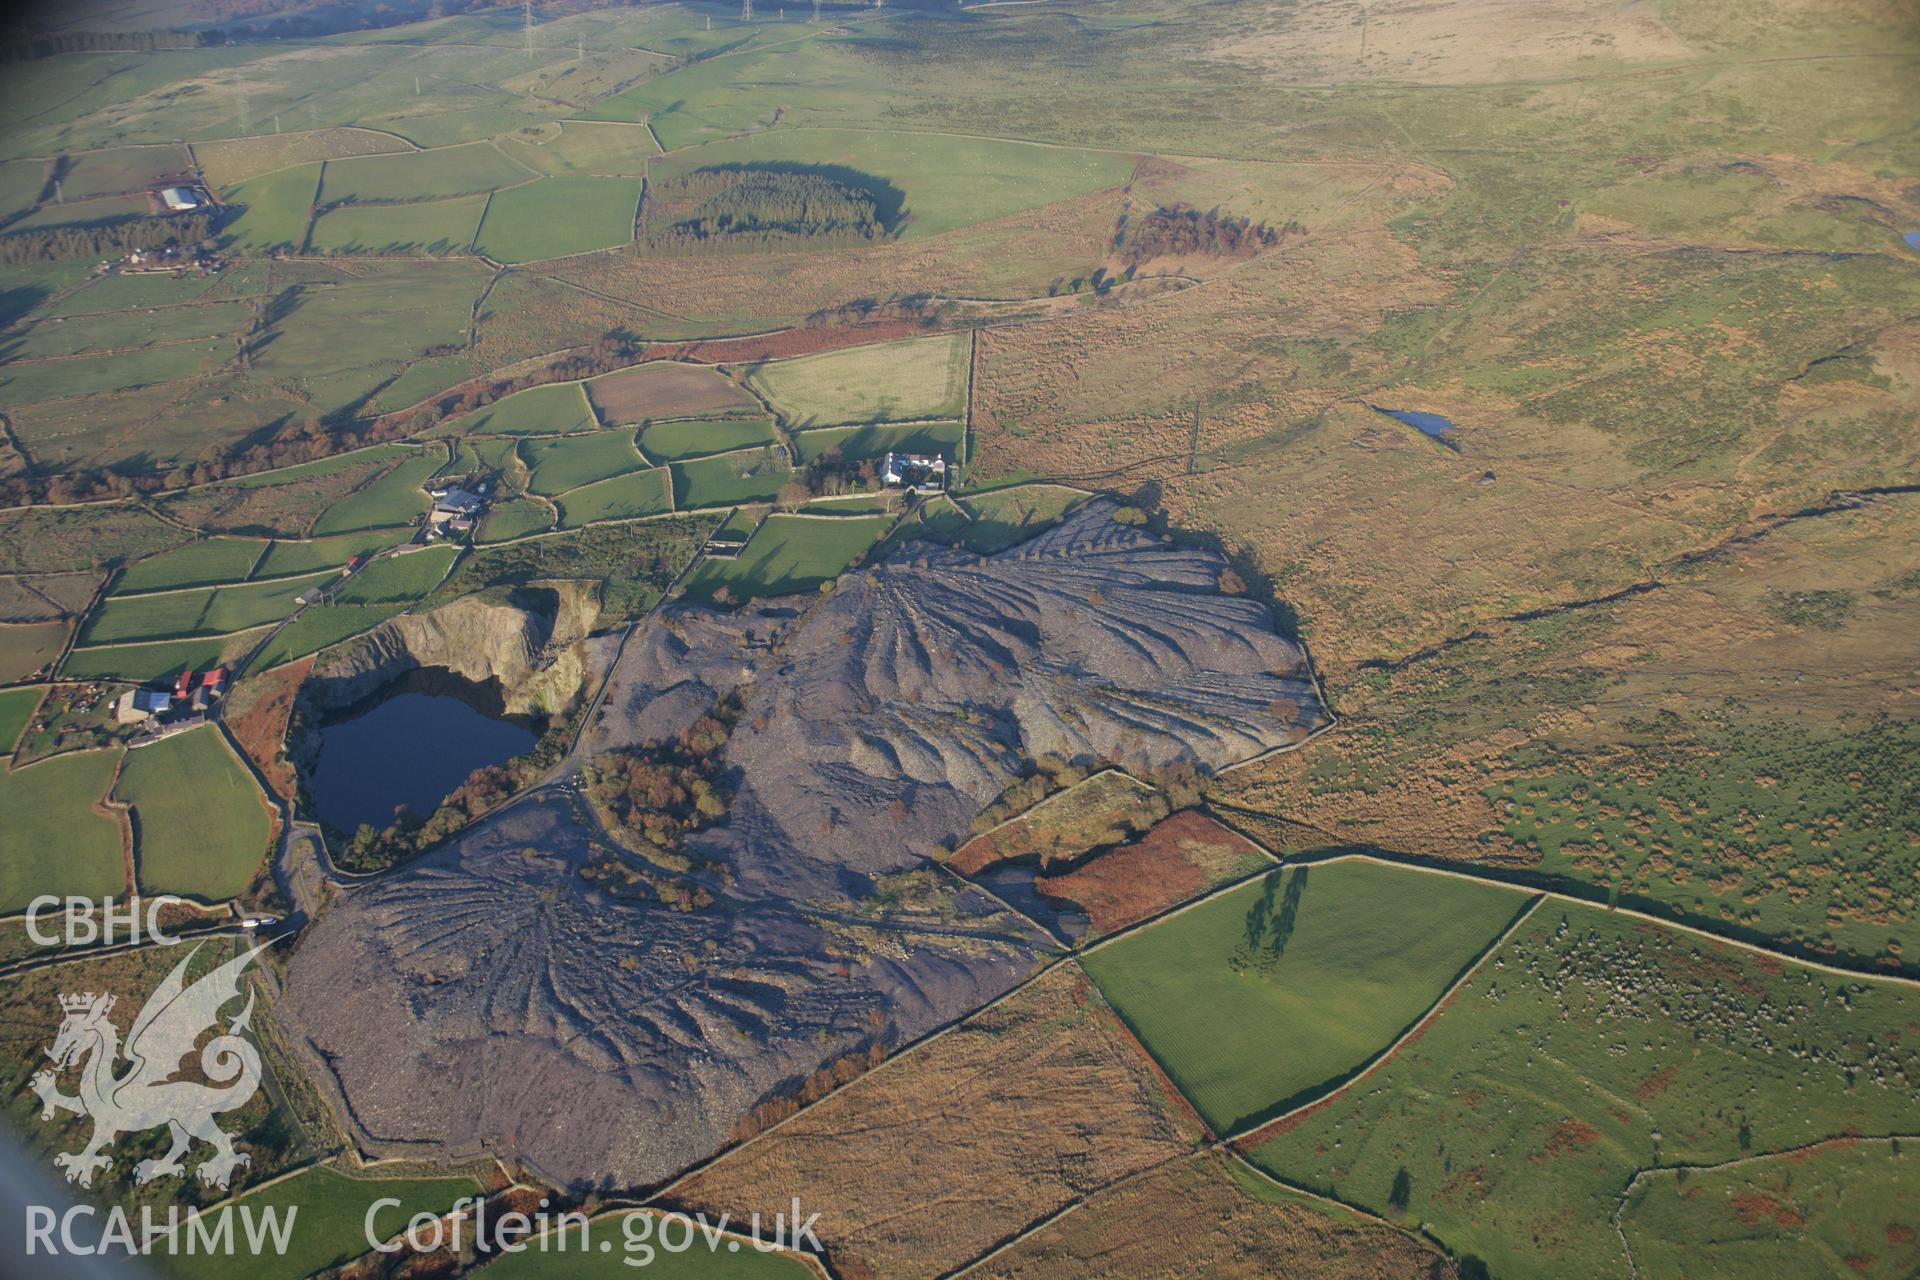 RCAHMW colour oblique aerial photograph of Bryn Hafod-y-Wern Slate Quarry from the south-east. Taken on 21 November 2005 by Toby Driver